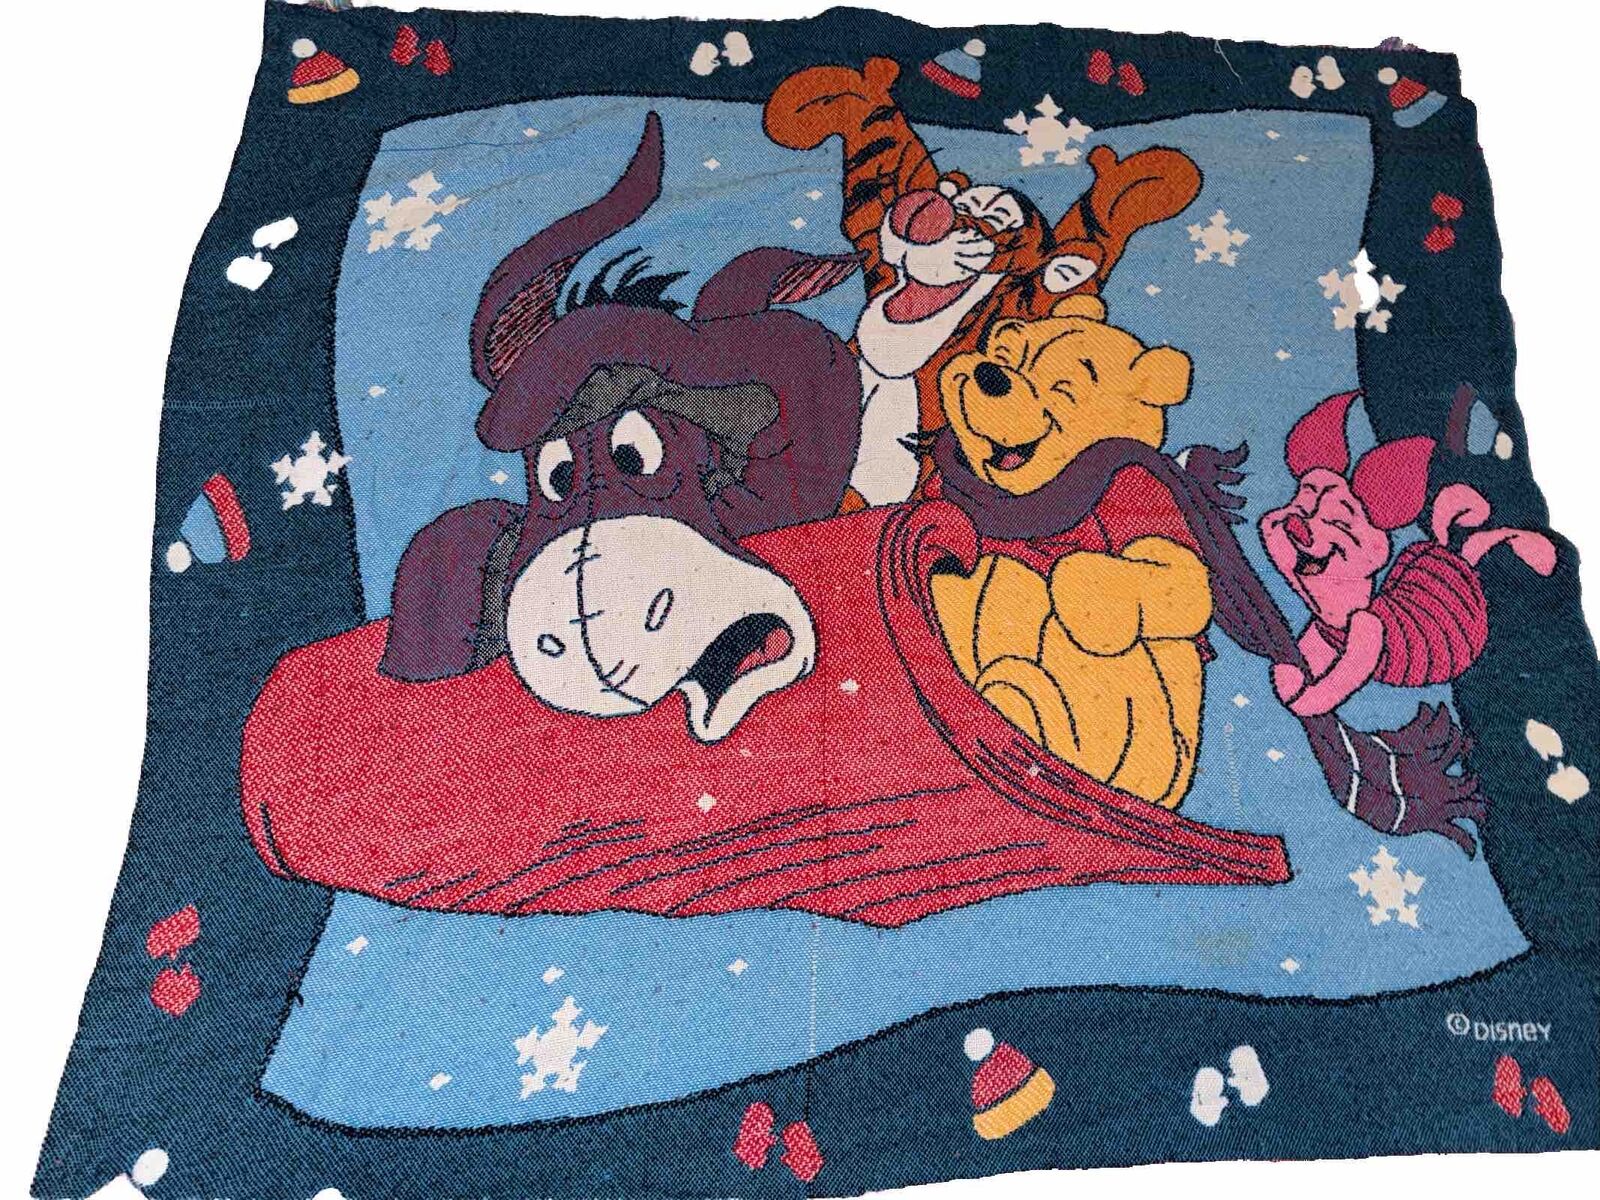 Disney Vintage Blanket of Winnie the Pooh with friends winter snow day